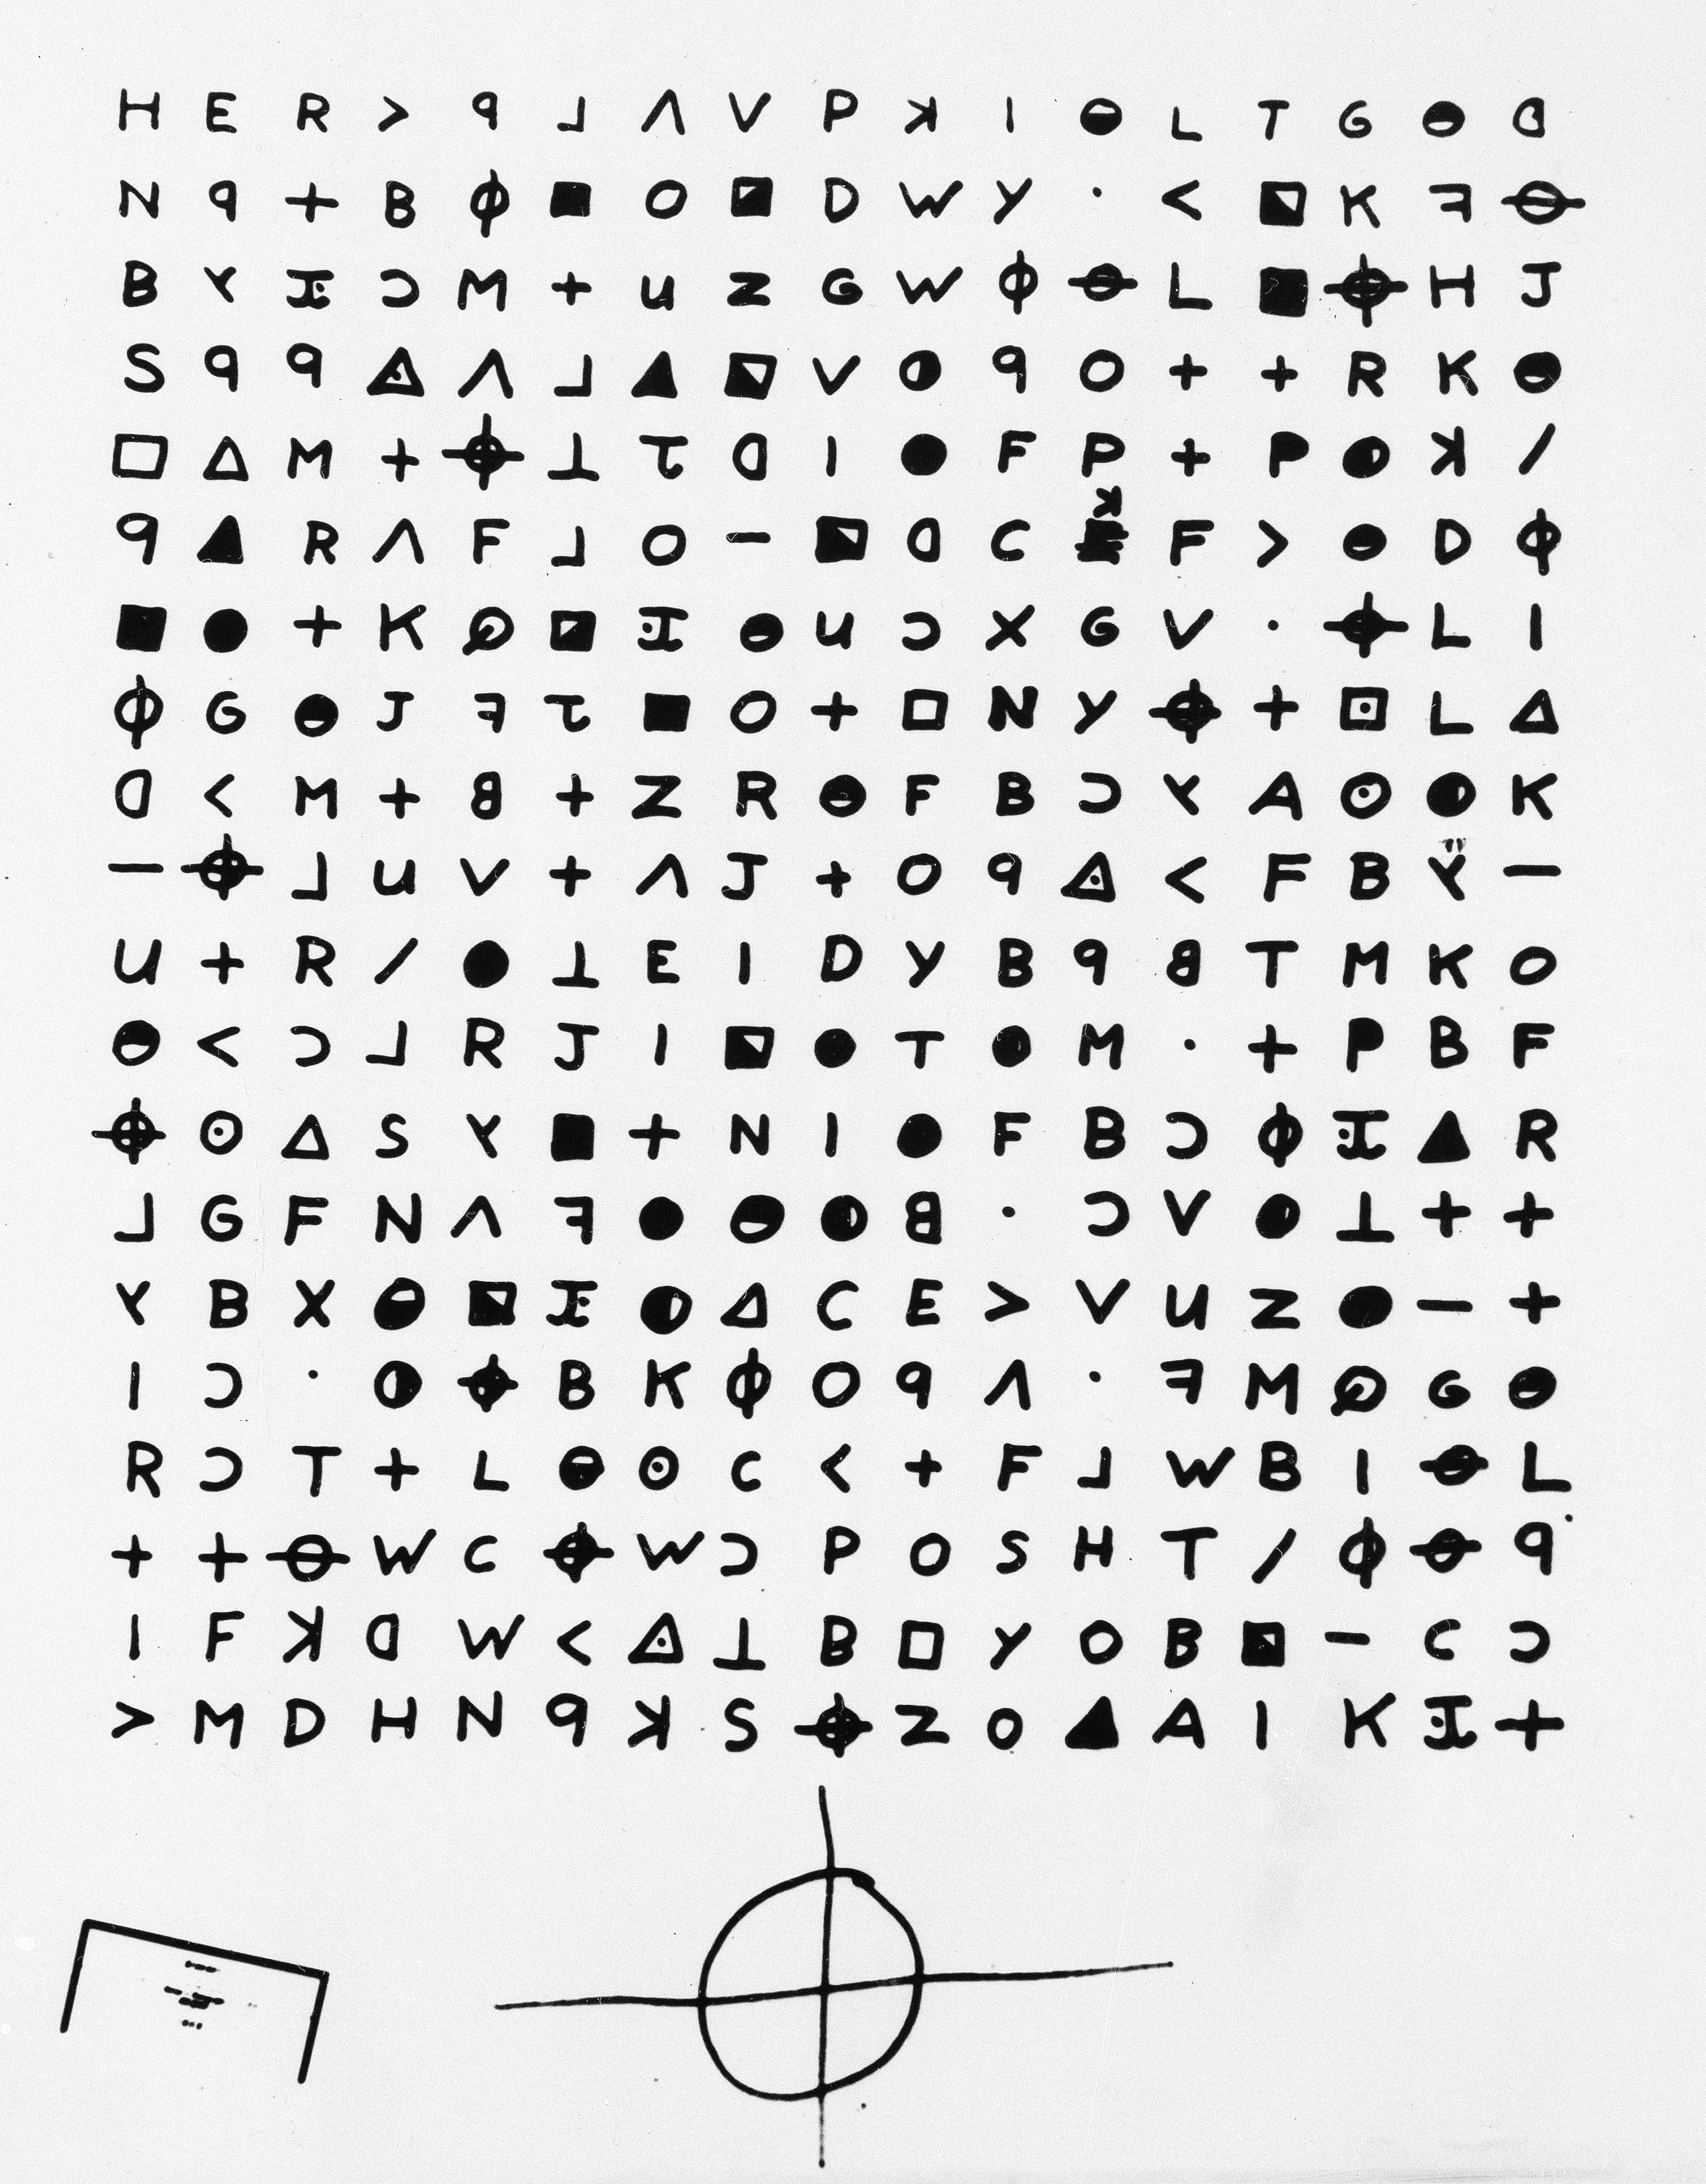 This is a copy of a cryptogram sent to the San Francisco Chronicle, Nov. 11, 1969. (AP)